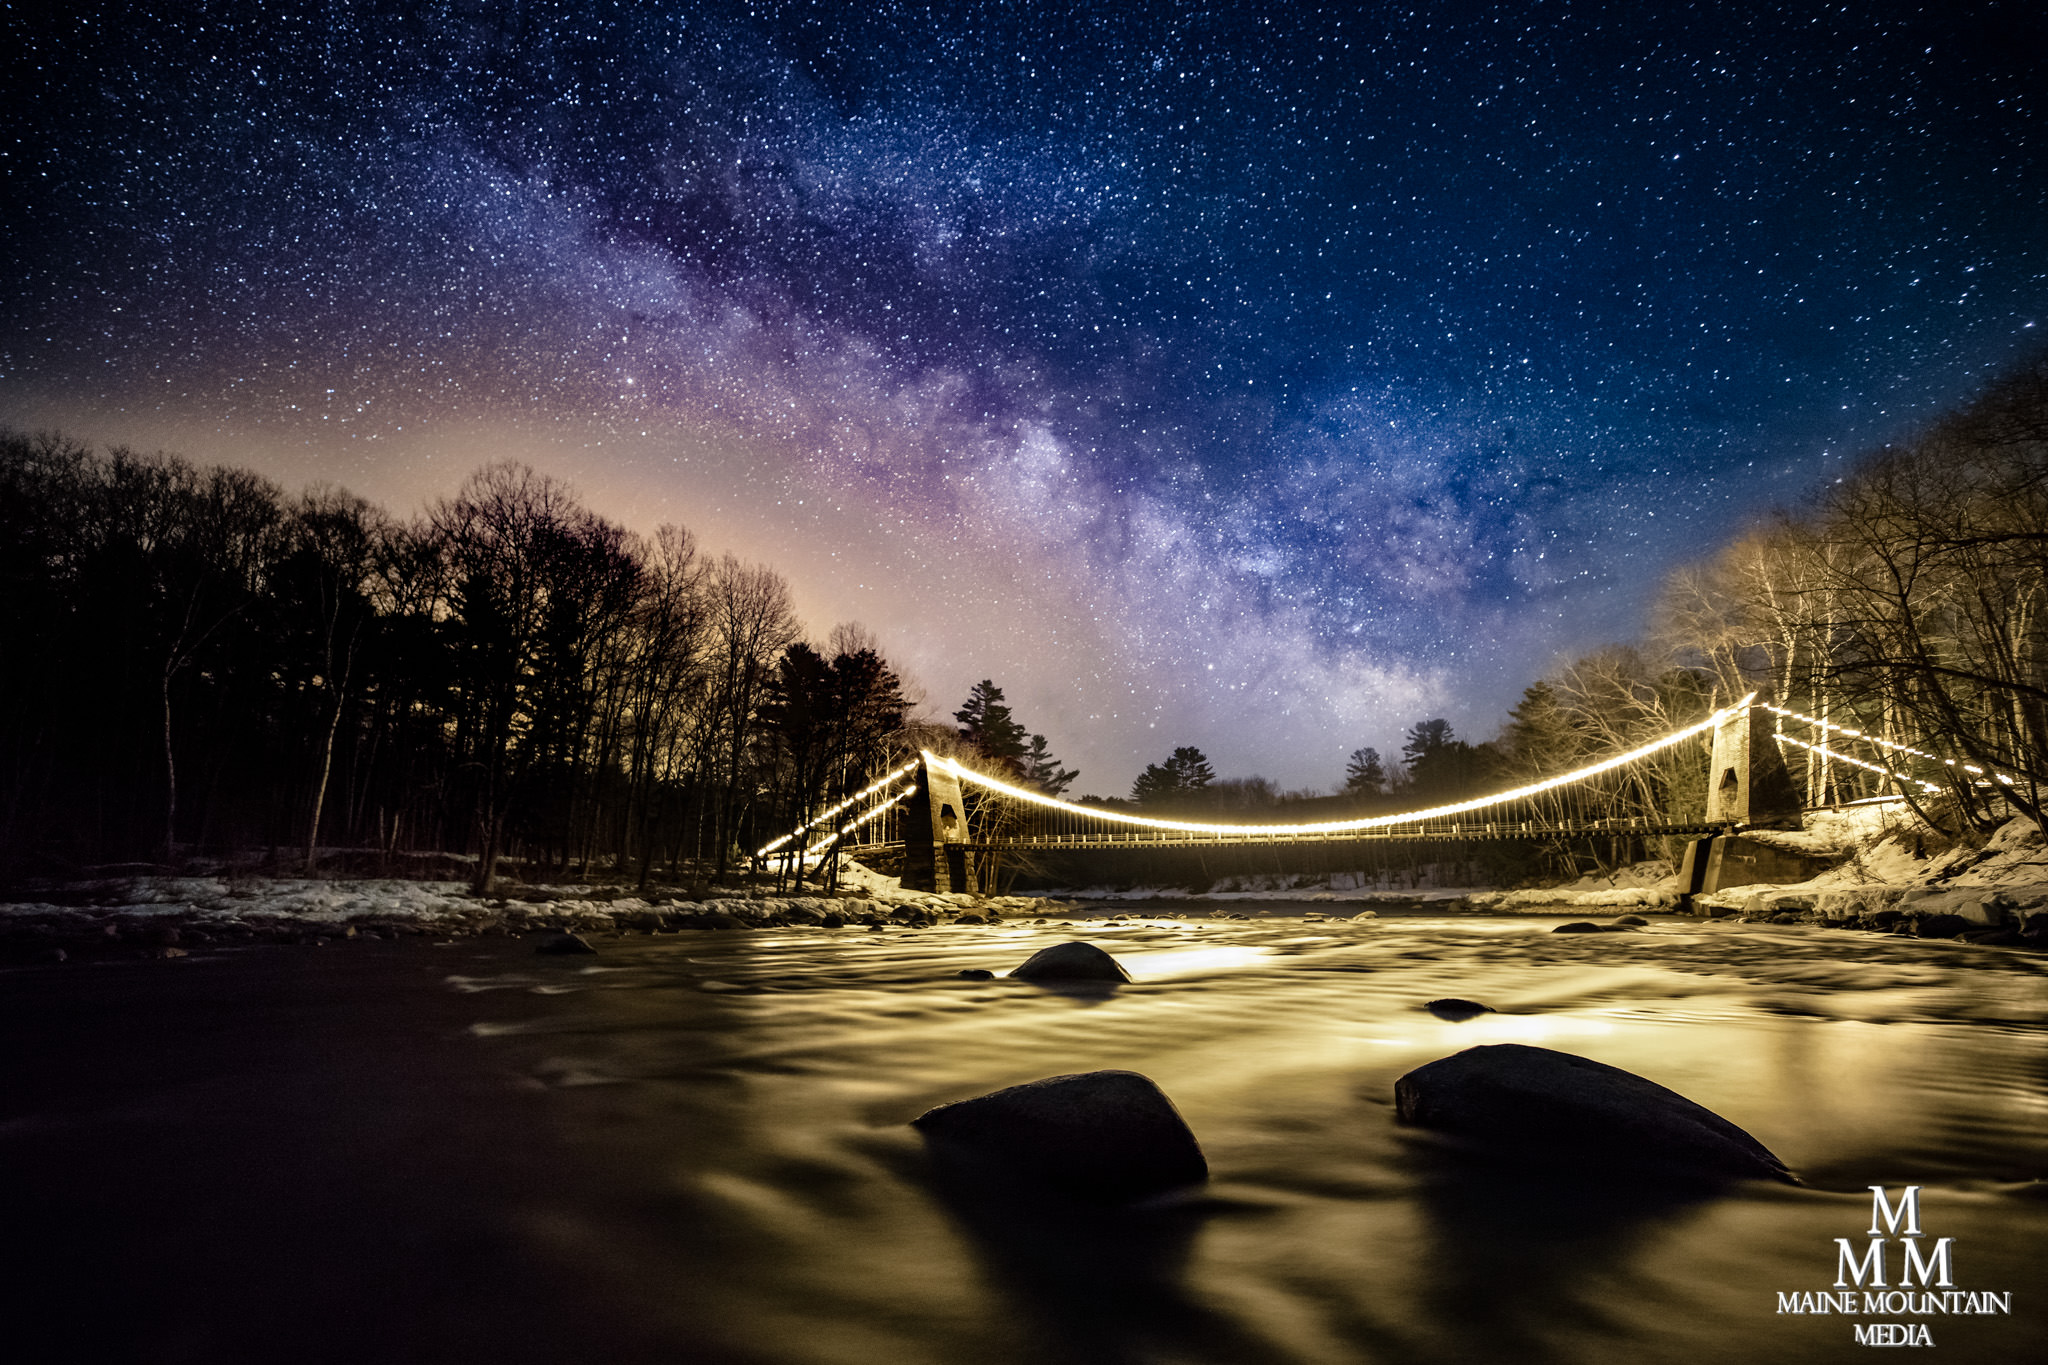 Image of a river with a lit up bridge and the Milky Way in the background